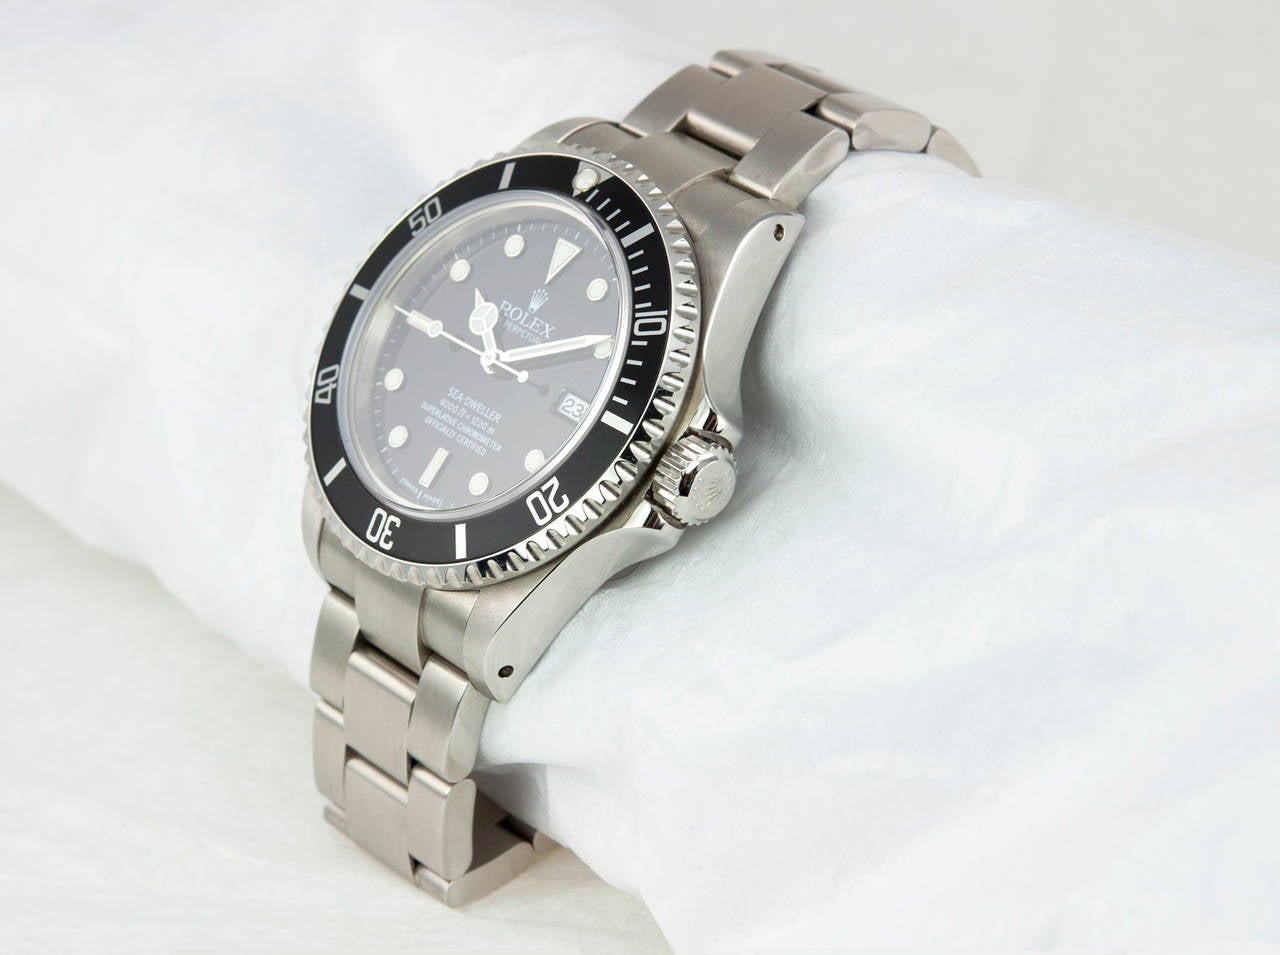 Rolex stainless steel Sea-Dweller wristwatch, Ref. 16600, 2000. This watch features a helium escape valve, a black dial with luminescent hour markers, automatic movement with date, scratch-resistant sapphire crystal, waterproof screw-down crown.